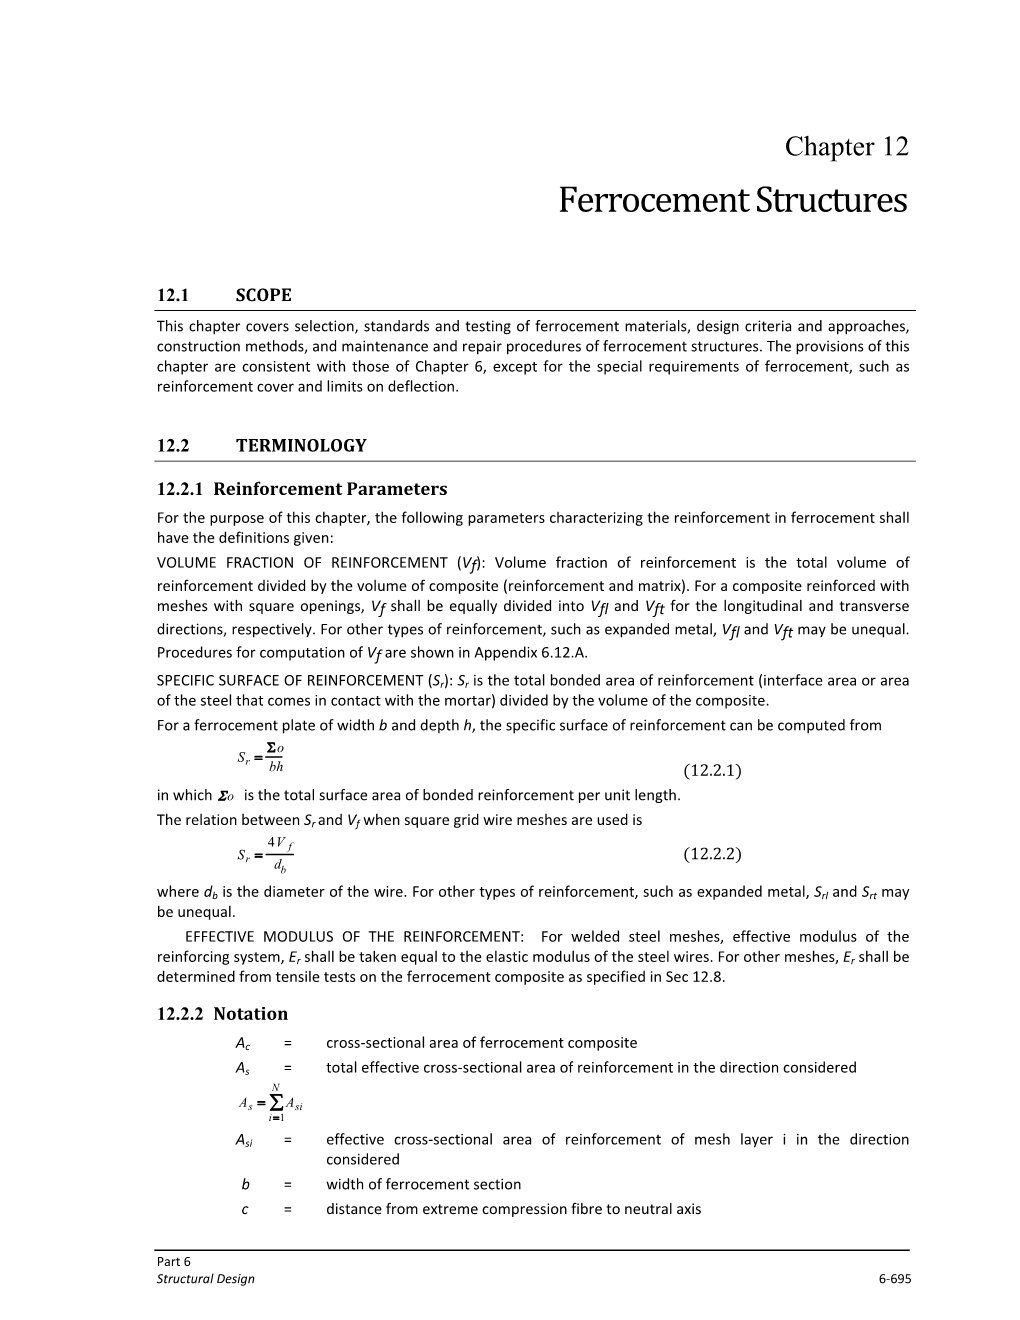 Ferrocement Structures